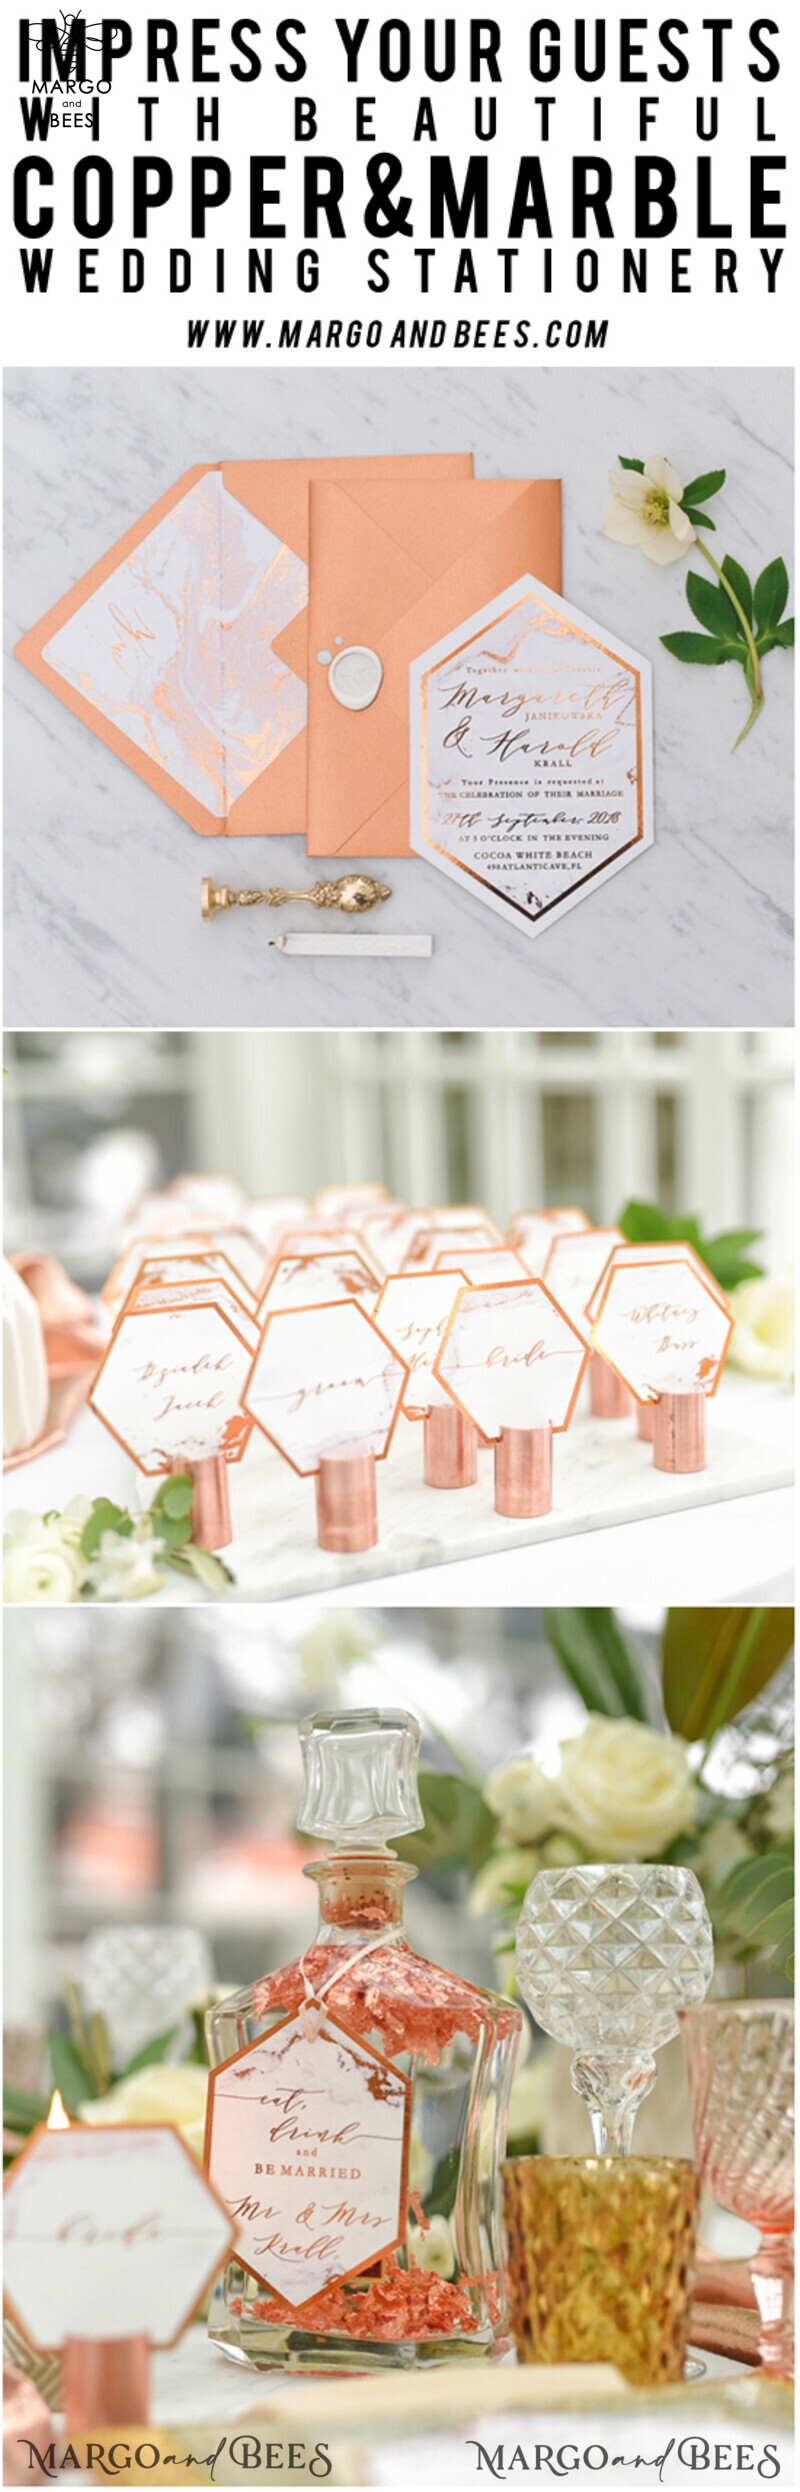 Exquisite Copper Marble Wedding Invitations with Glamour Glitter and Elegant Geometric Wedding Cards: Discover Our Bespoke Orange Wedding Stationery-8